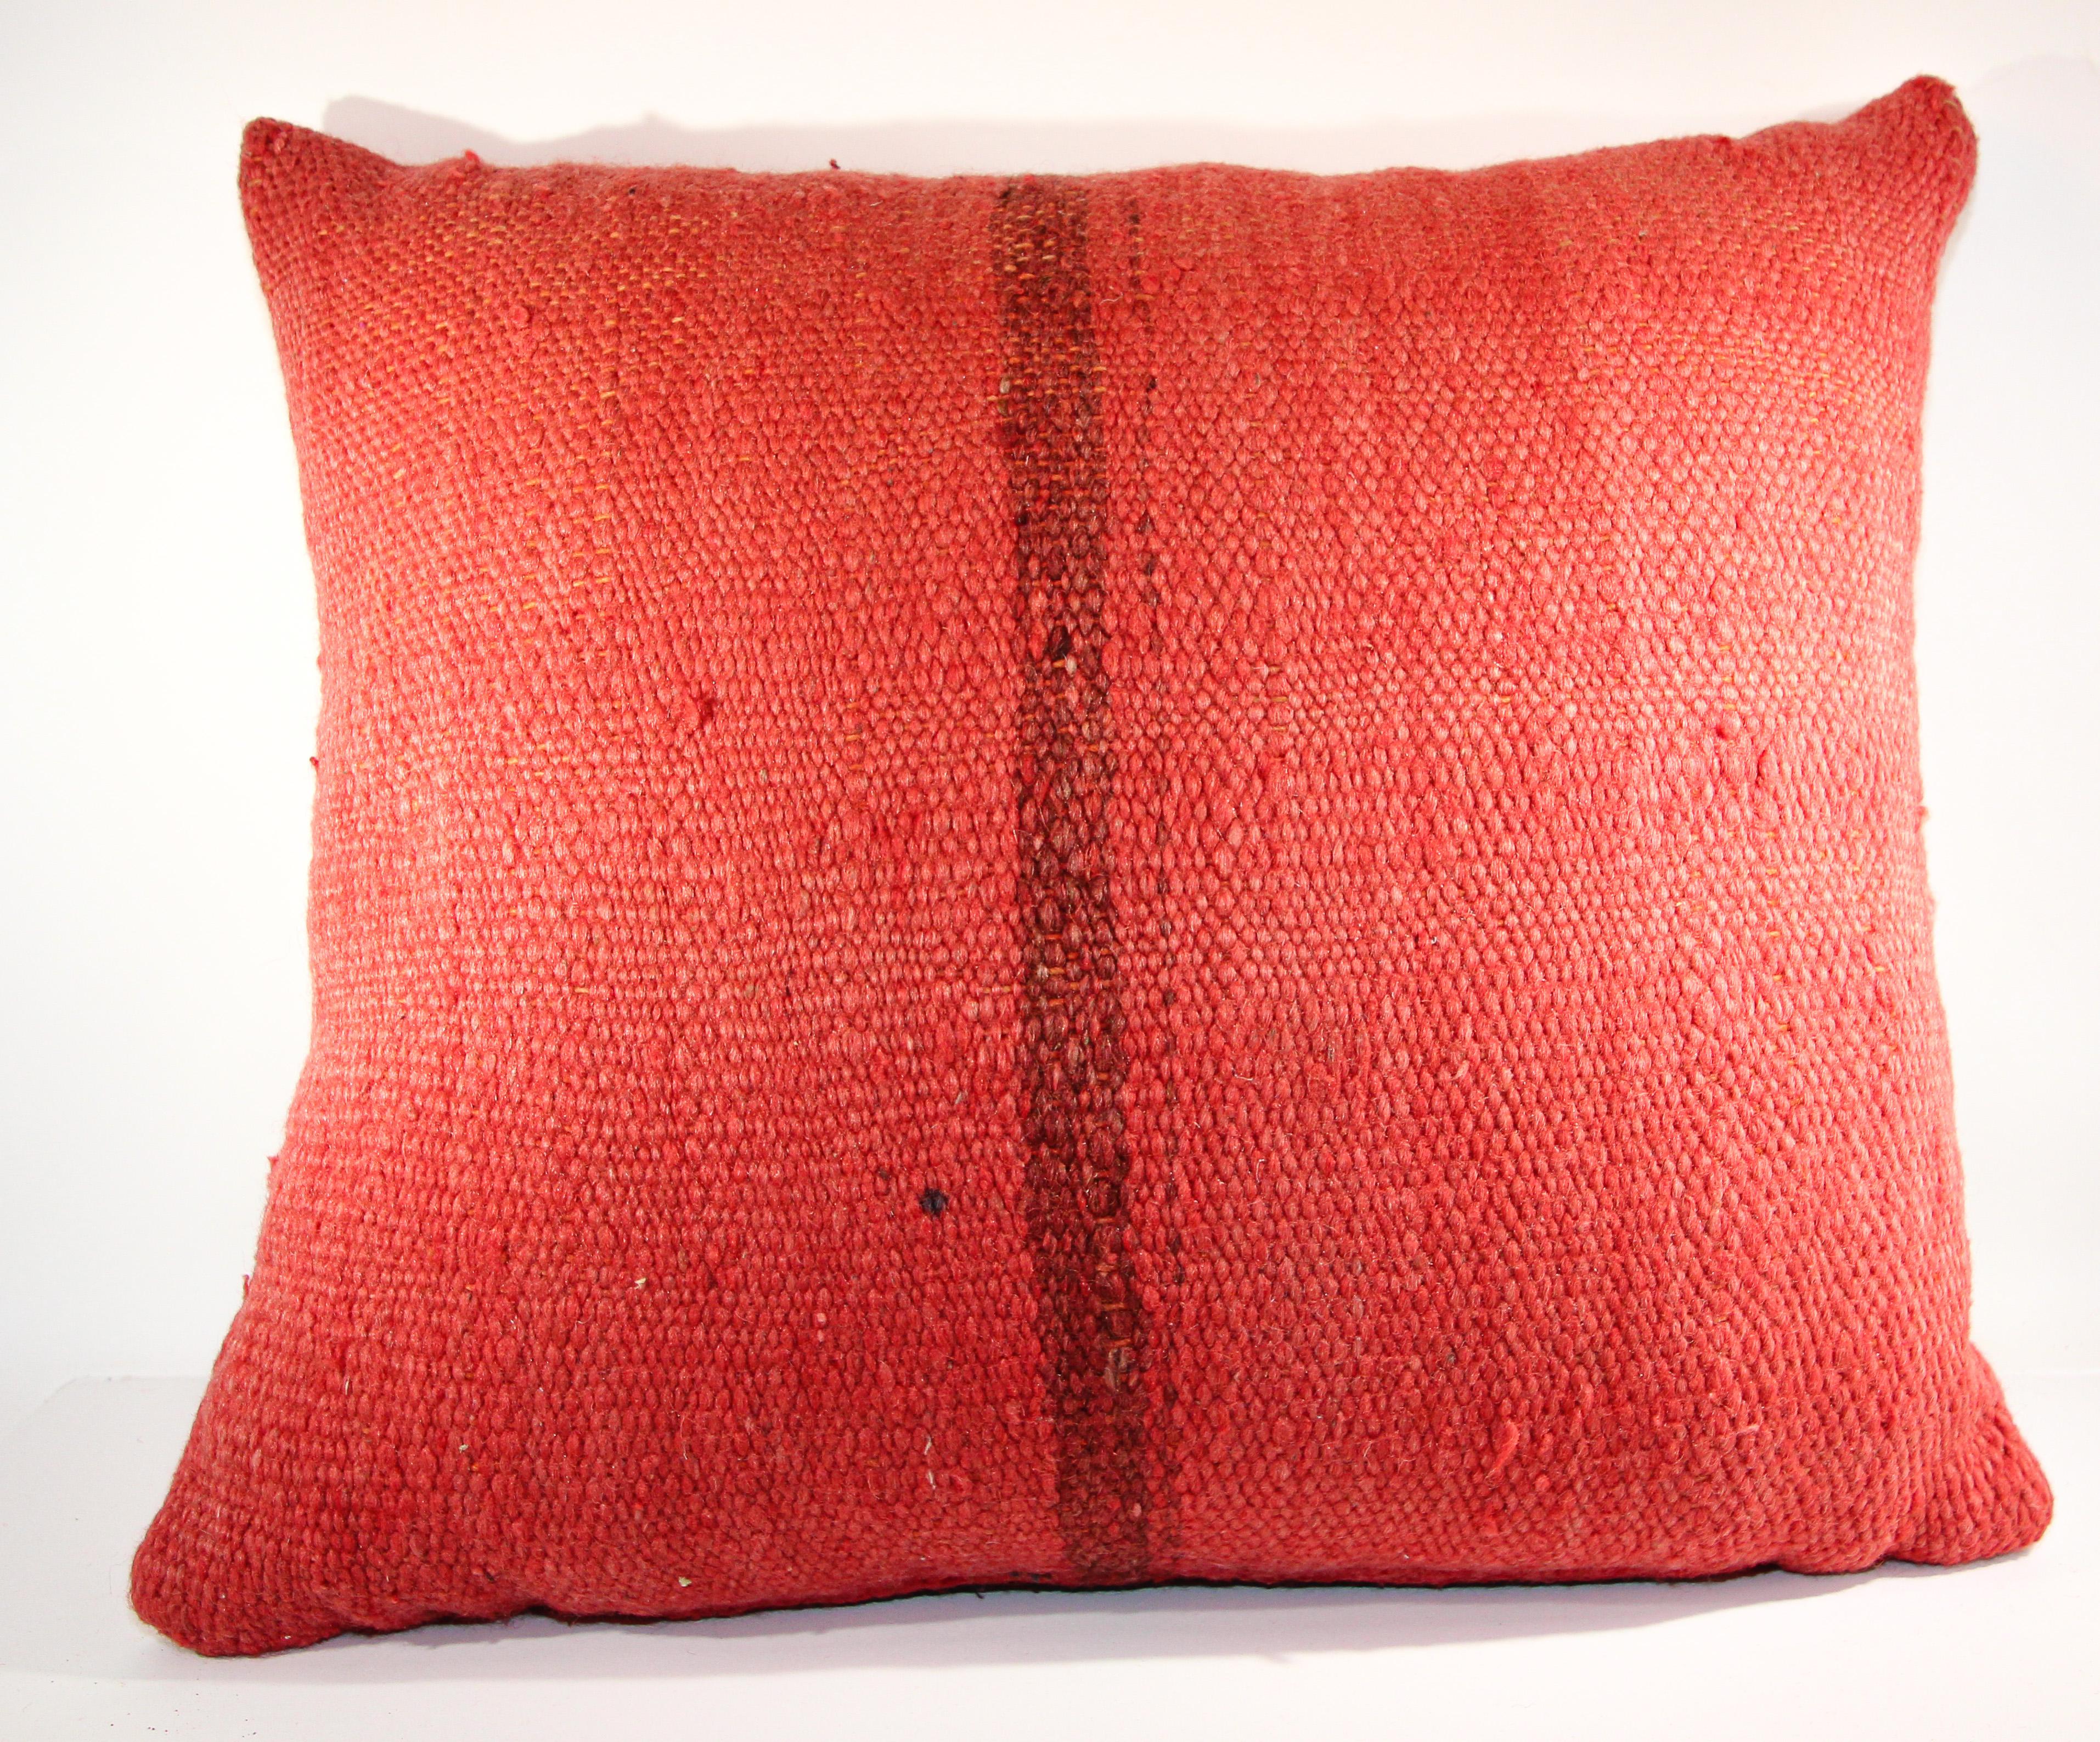 Vintage Moroccan Berber red pillow cut from an old handwoven Moroccan tribal flat-weave Kilim tribal rug.
Great handcrafted textile with red earth tone color handwoven by the Berber women from the Atlas Mountains of Morocco. 
Circa 1960-70.
   